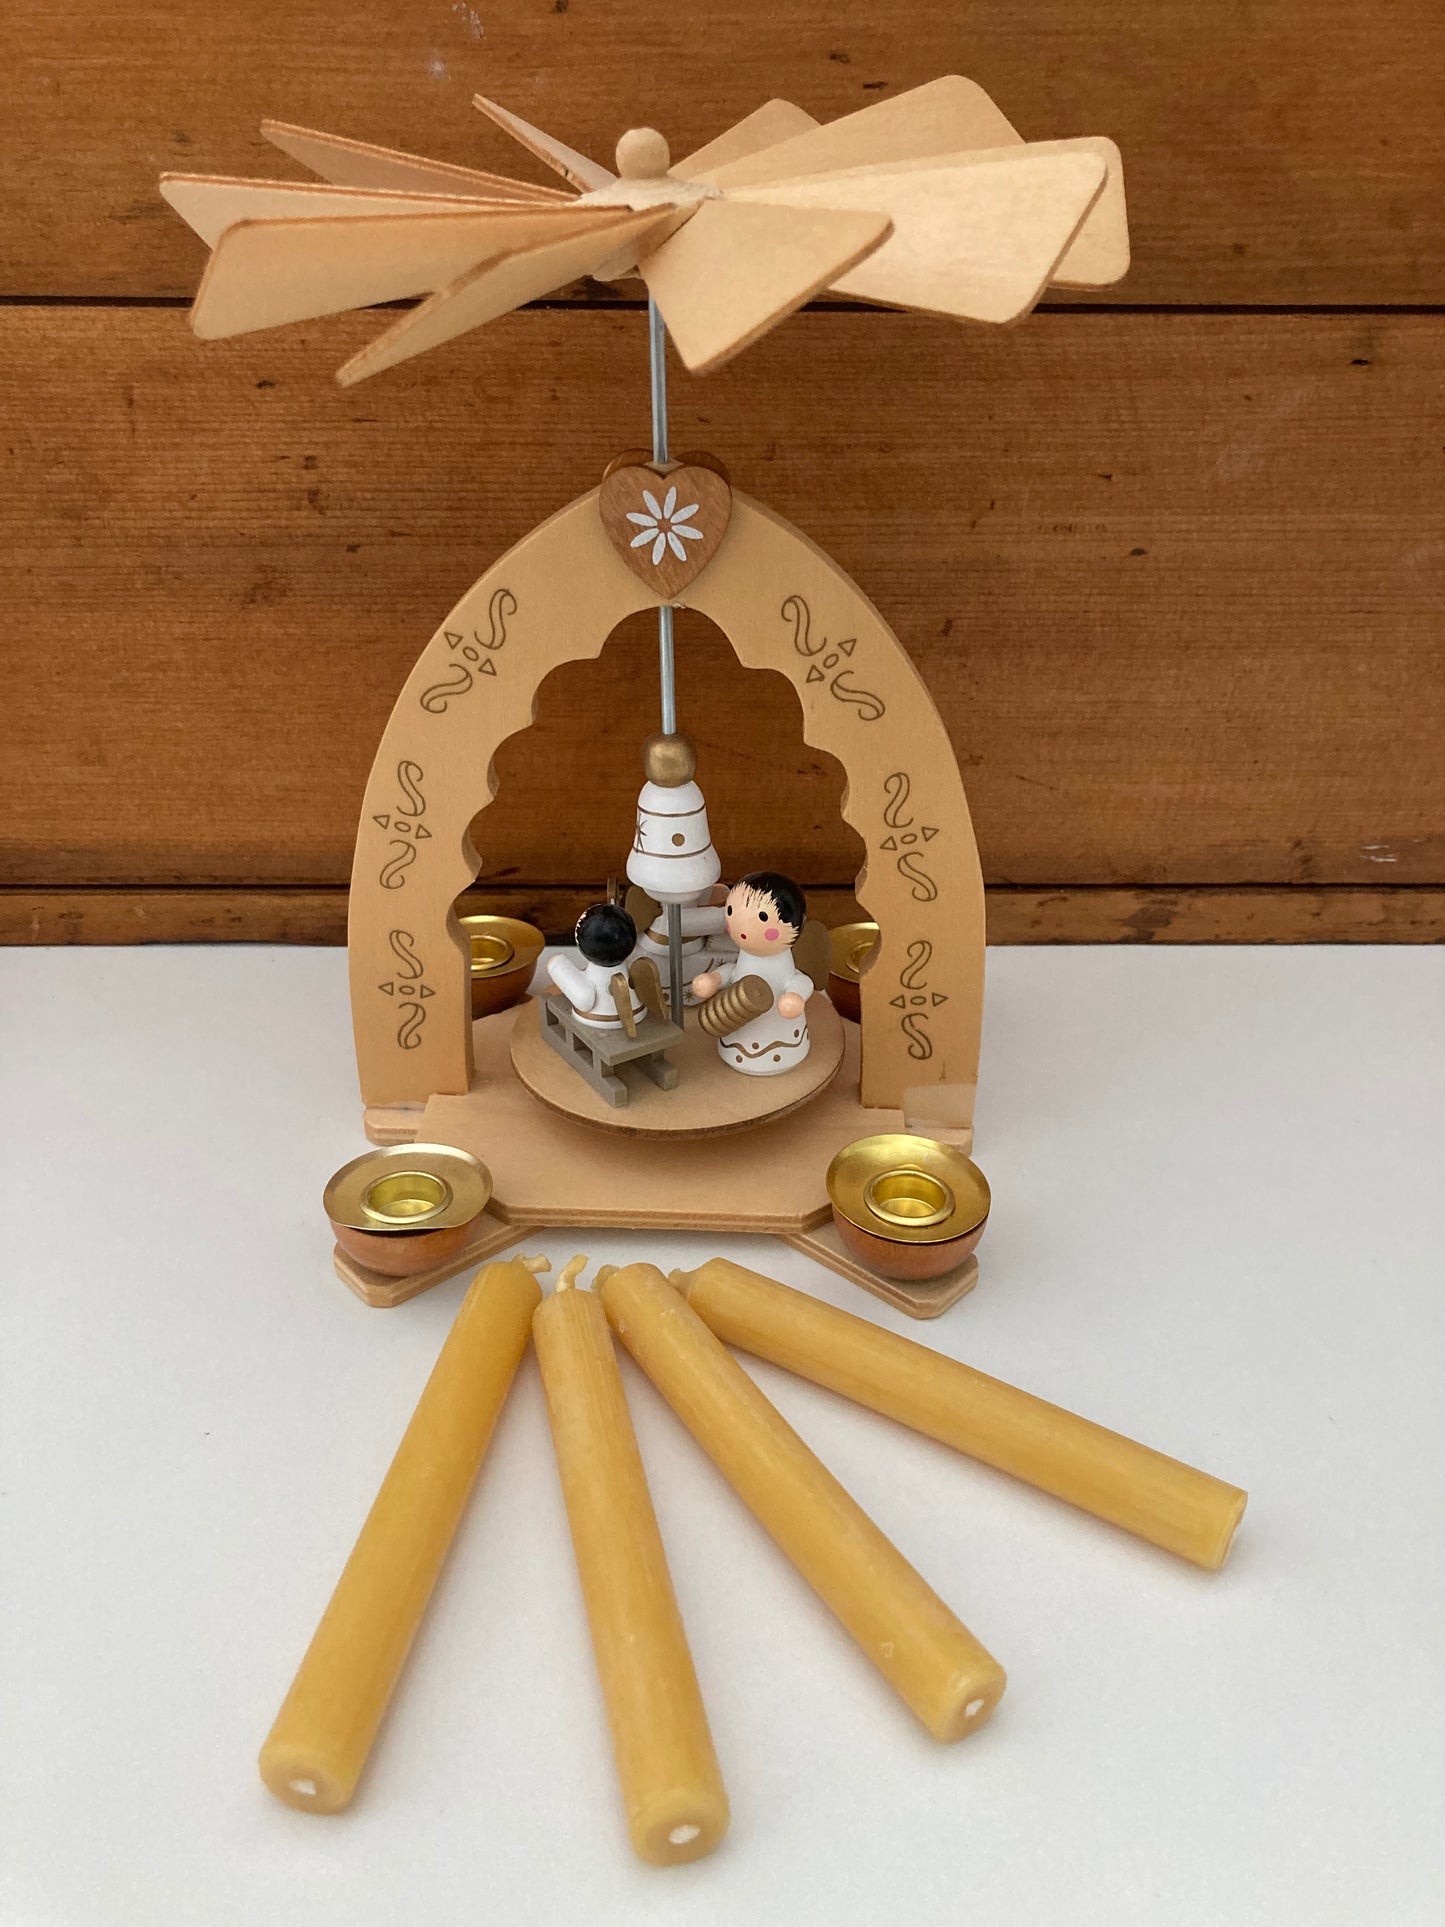 Beeswax Candle Wooden Carousel - ANGELS, with 4 Beeswax Candles!